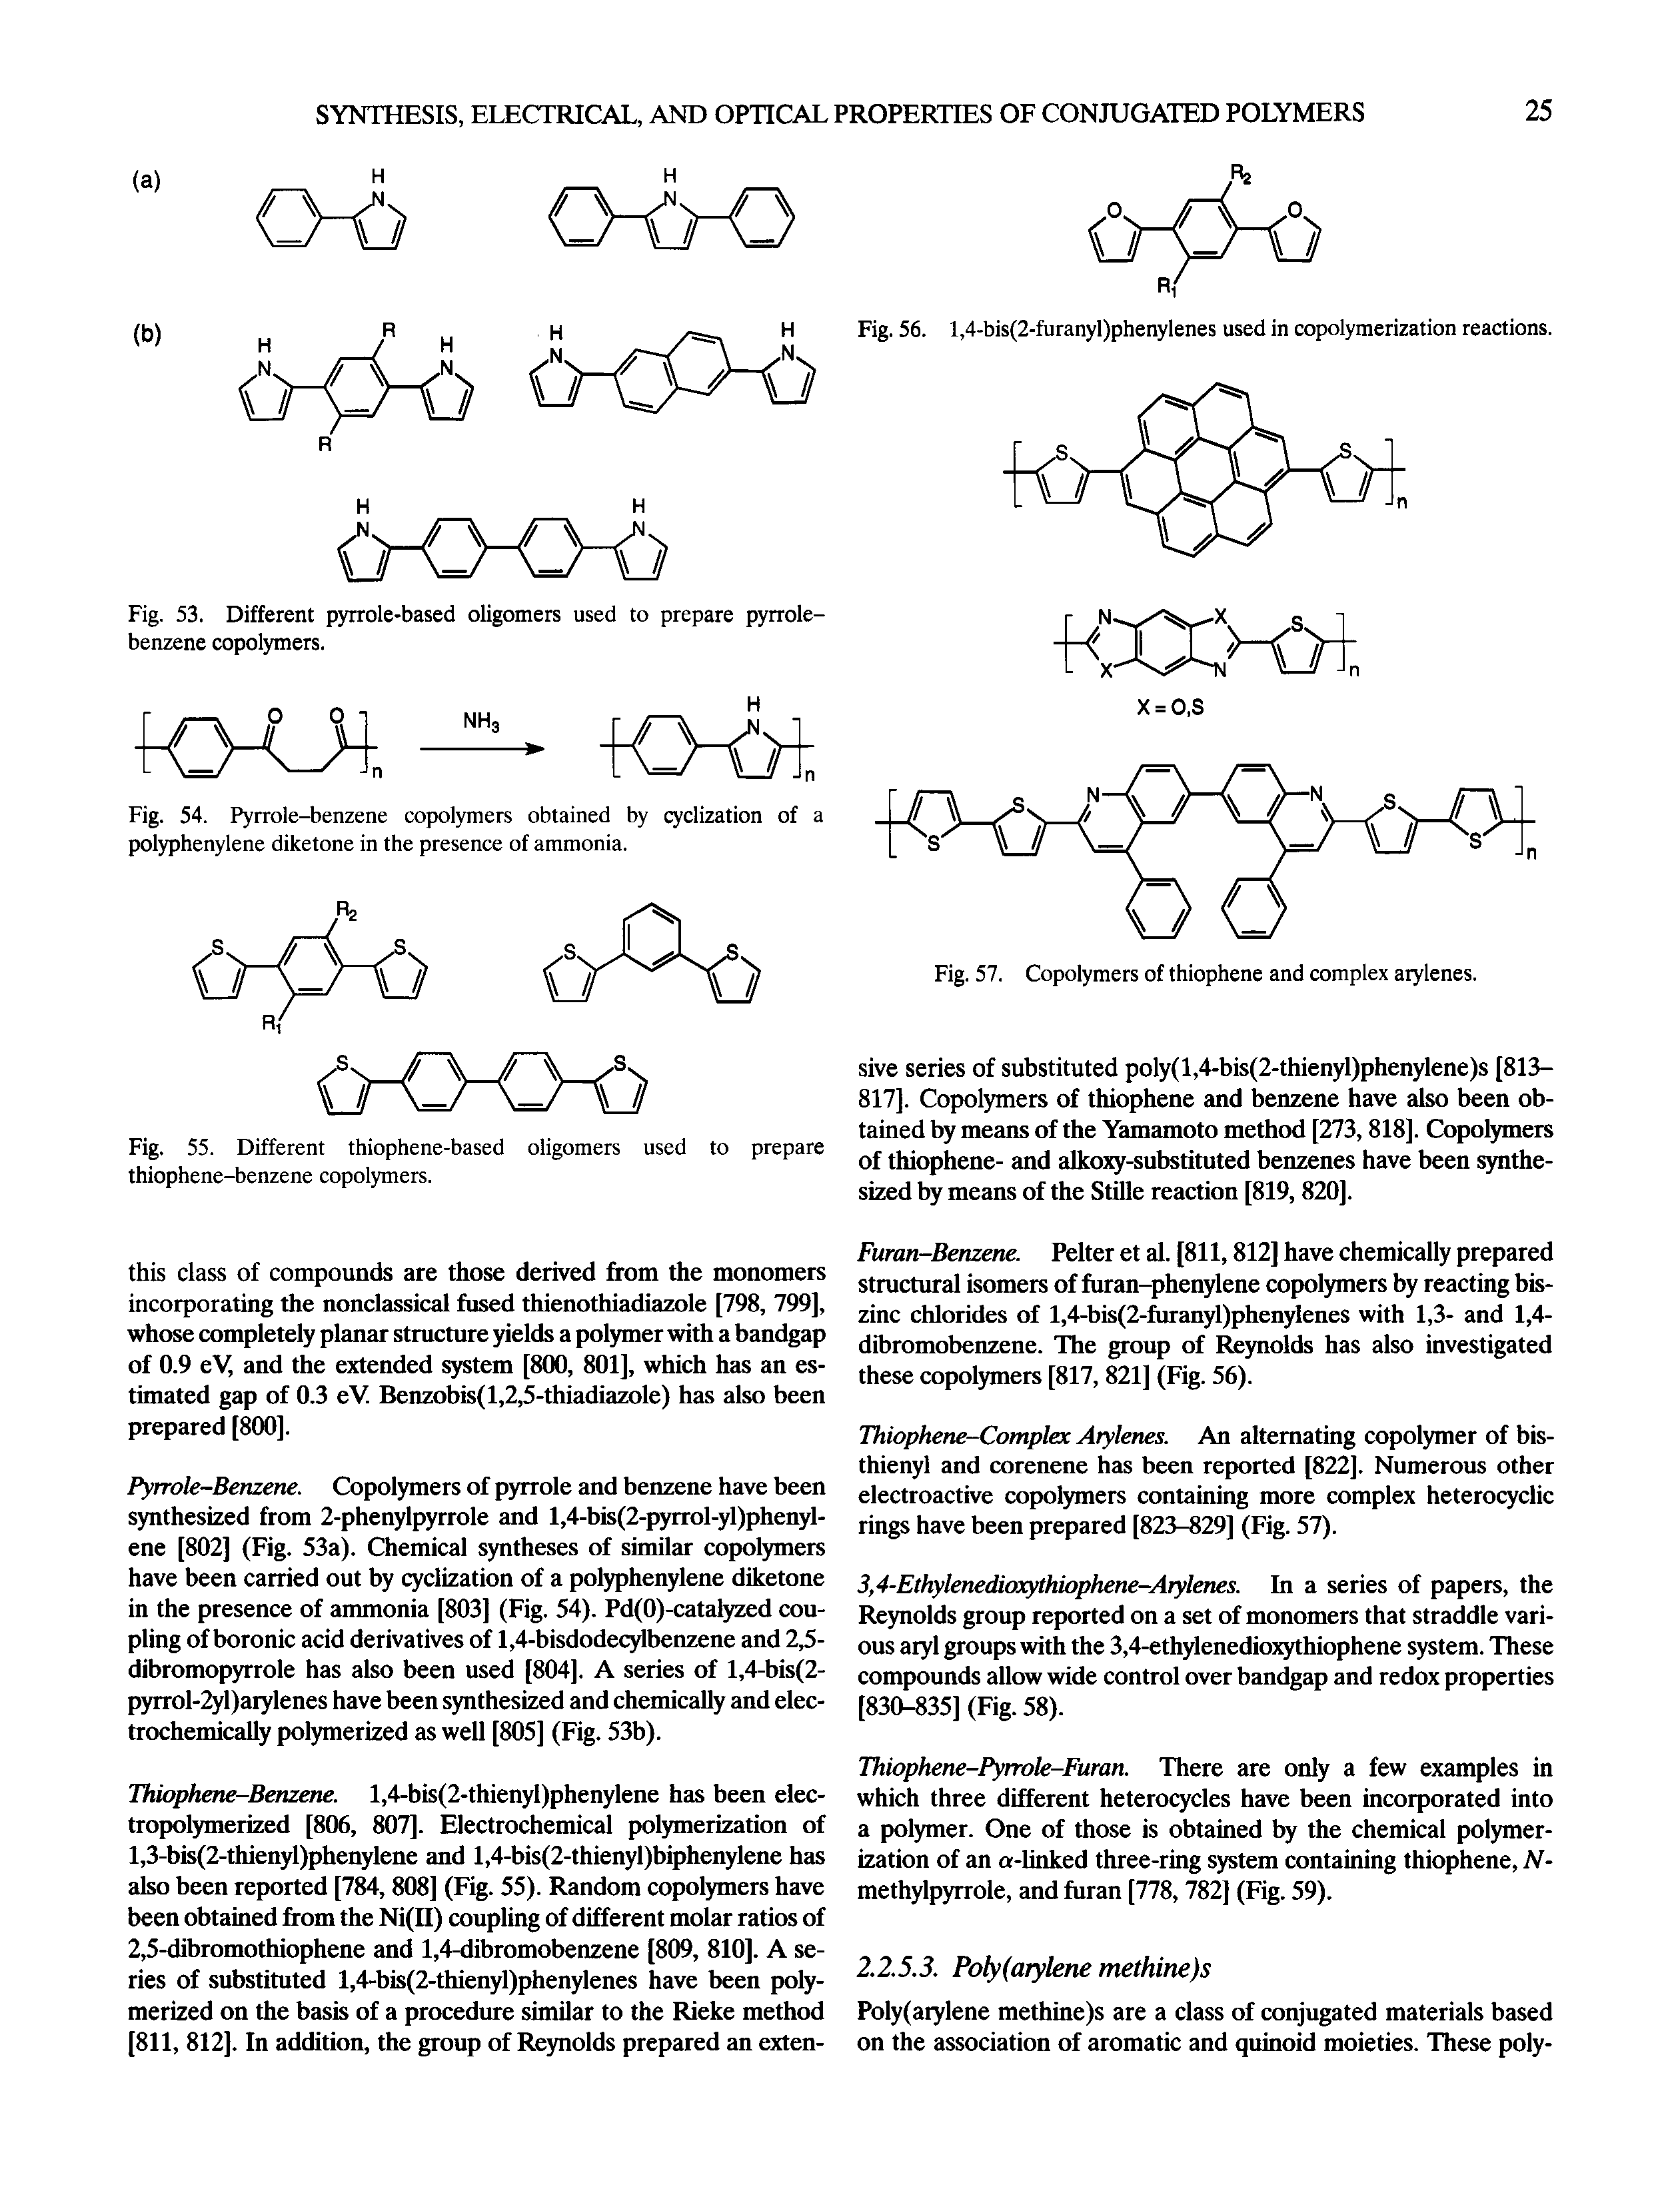 Fig. 53. Different pyrrole-based oligomers used to prepare pyrrole-benzene copolymers.